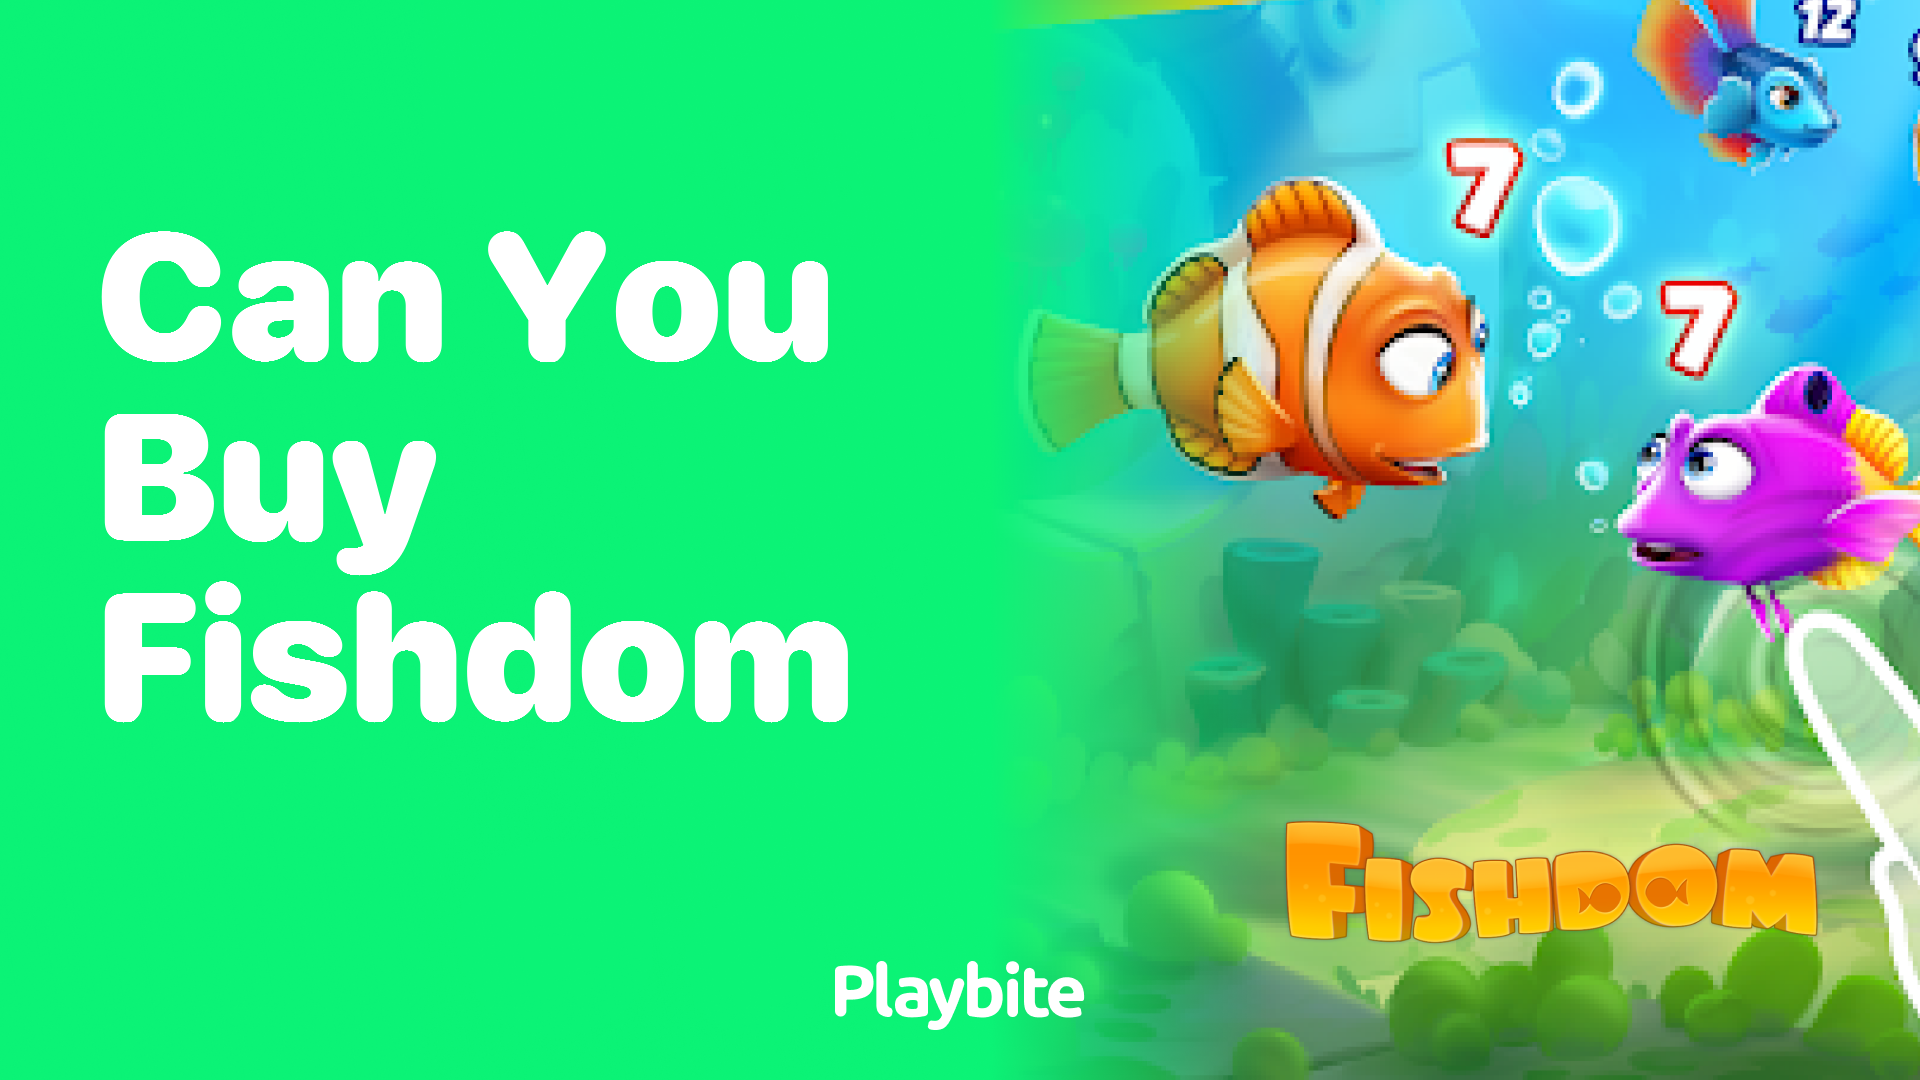 Can You Buy Fishdom?